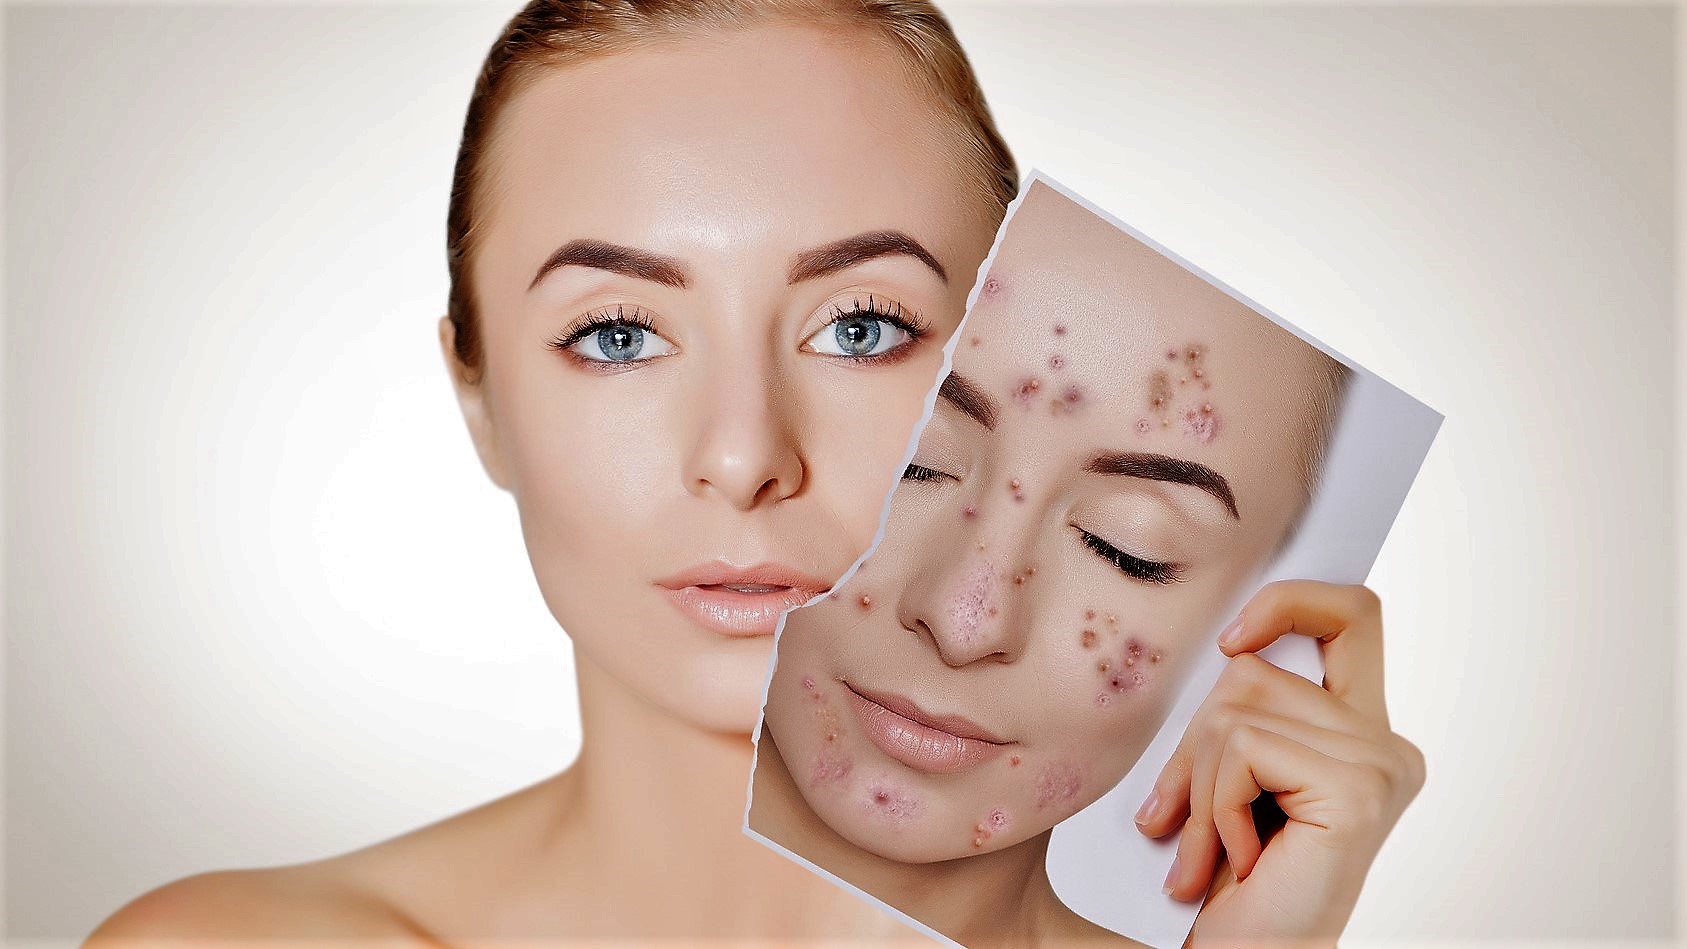 How to Get Rid of Acne: 8 Proven Ways to Fight Acne